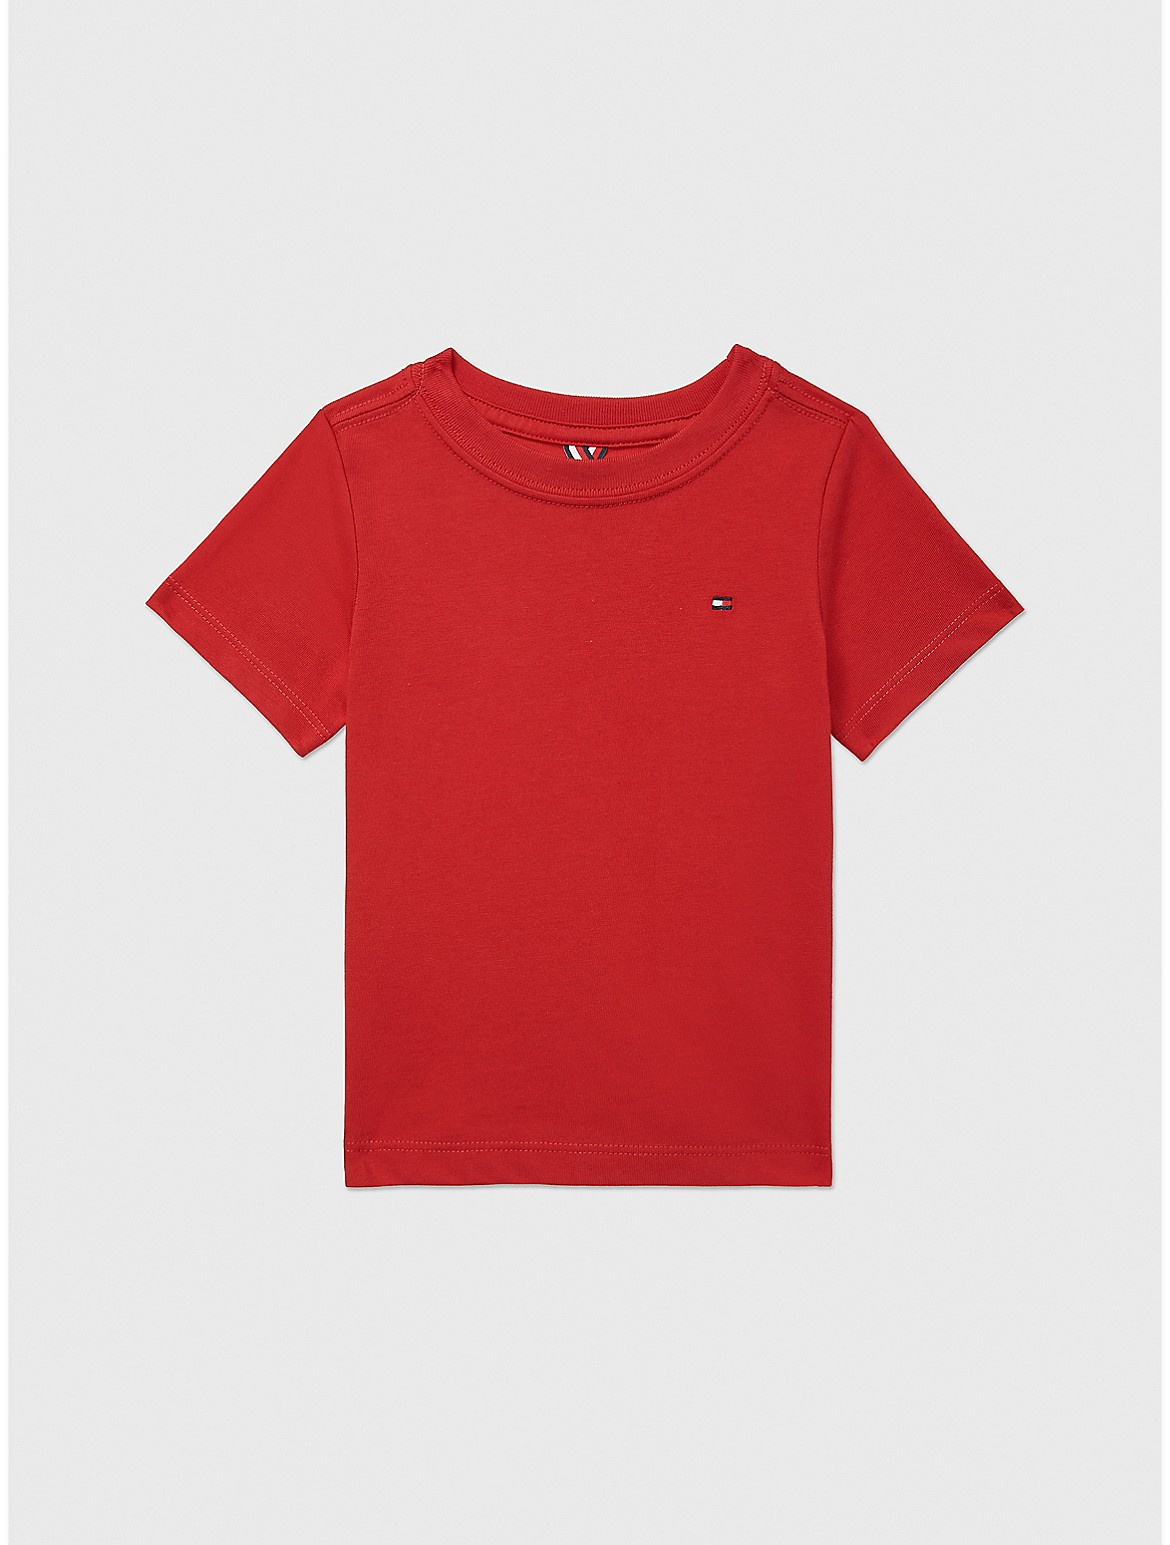 Tommy Hilfiger Boys' Babies' Solid T-Shirt - Red - 24M